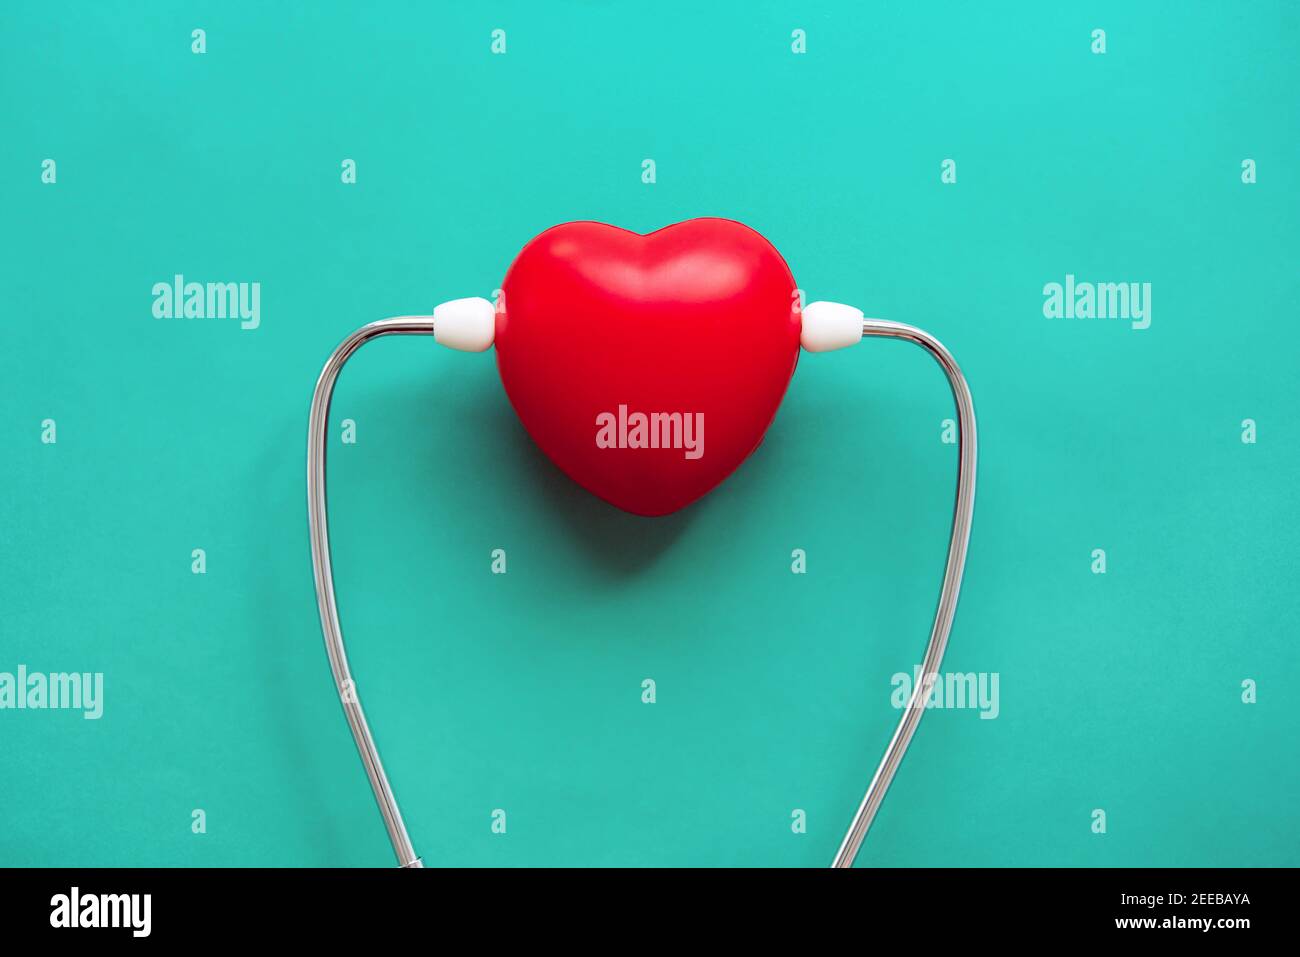 Red heart shape ball wearing stethoscope on green background, health care and medical concepts Stock Photo